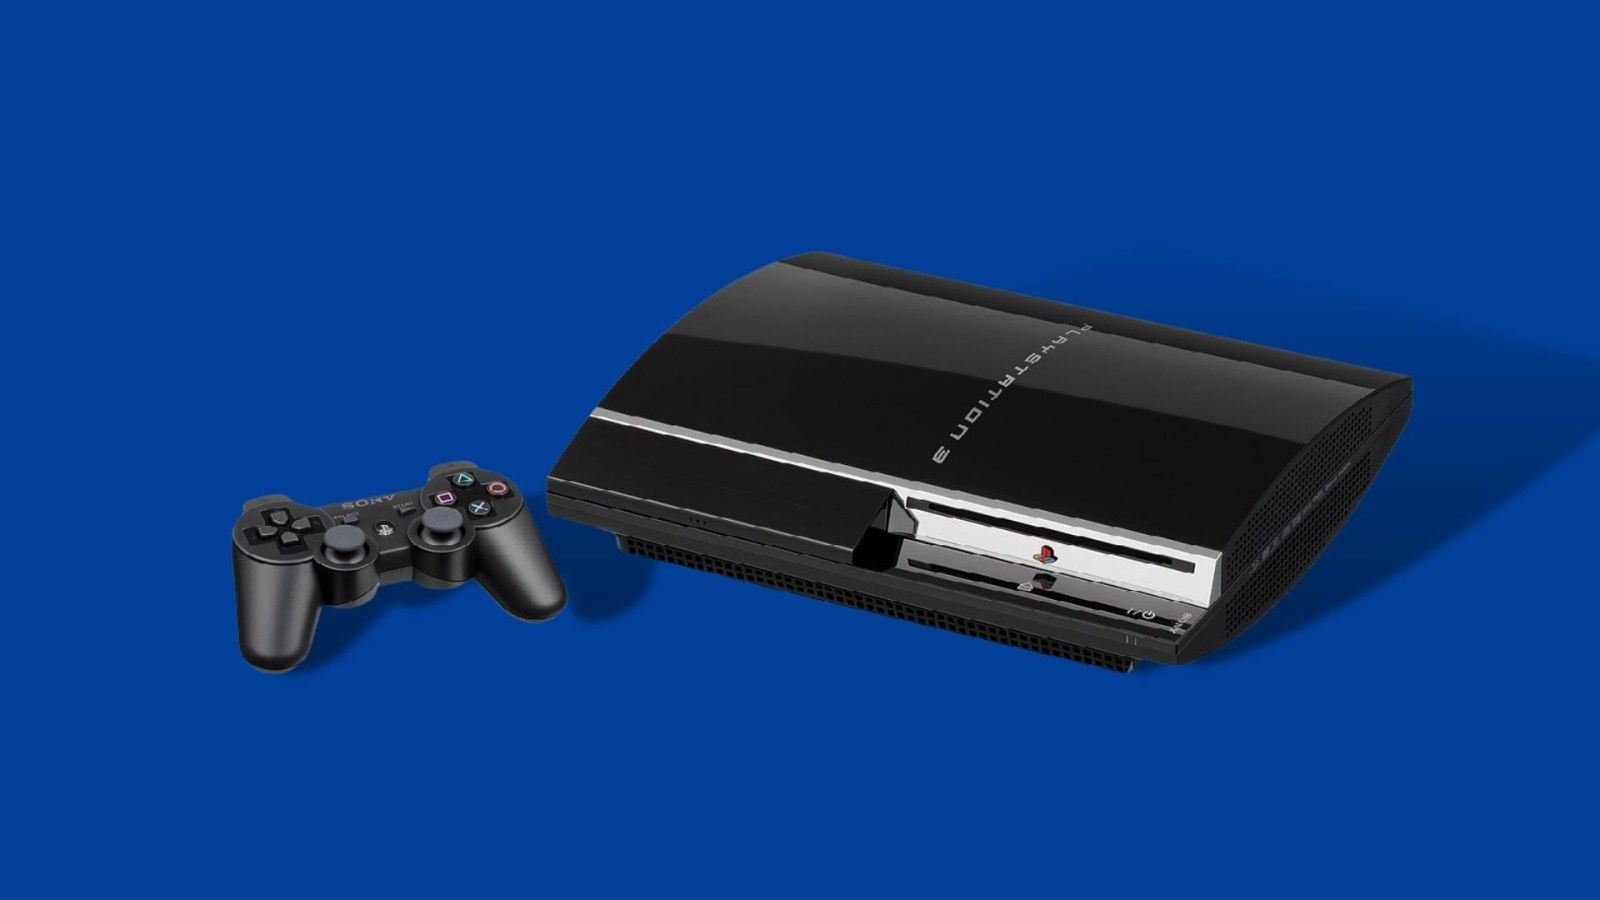 PlayStation 3 Support Is Ending In Japan After 15 Years - Gameranx